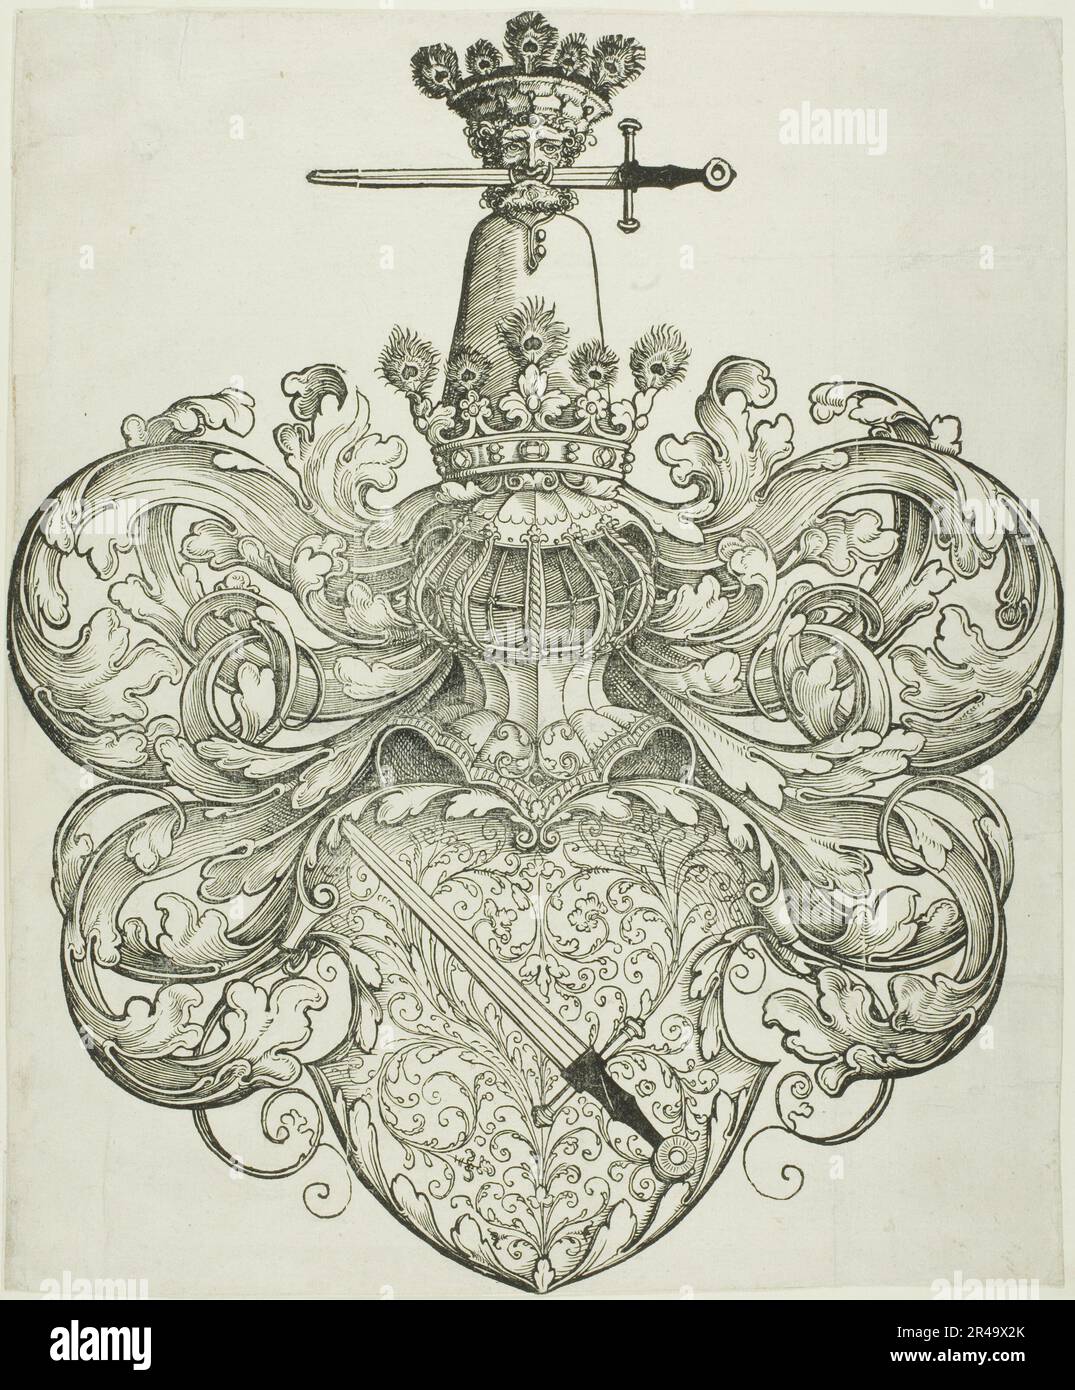 The Arms of the Family Kress von Kressenstein, after 1530. Stock Photo